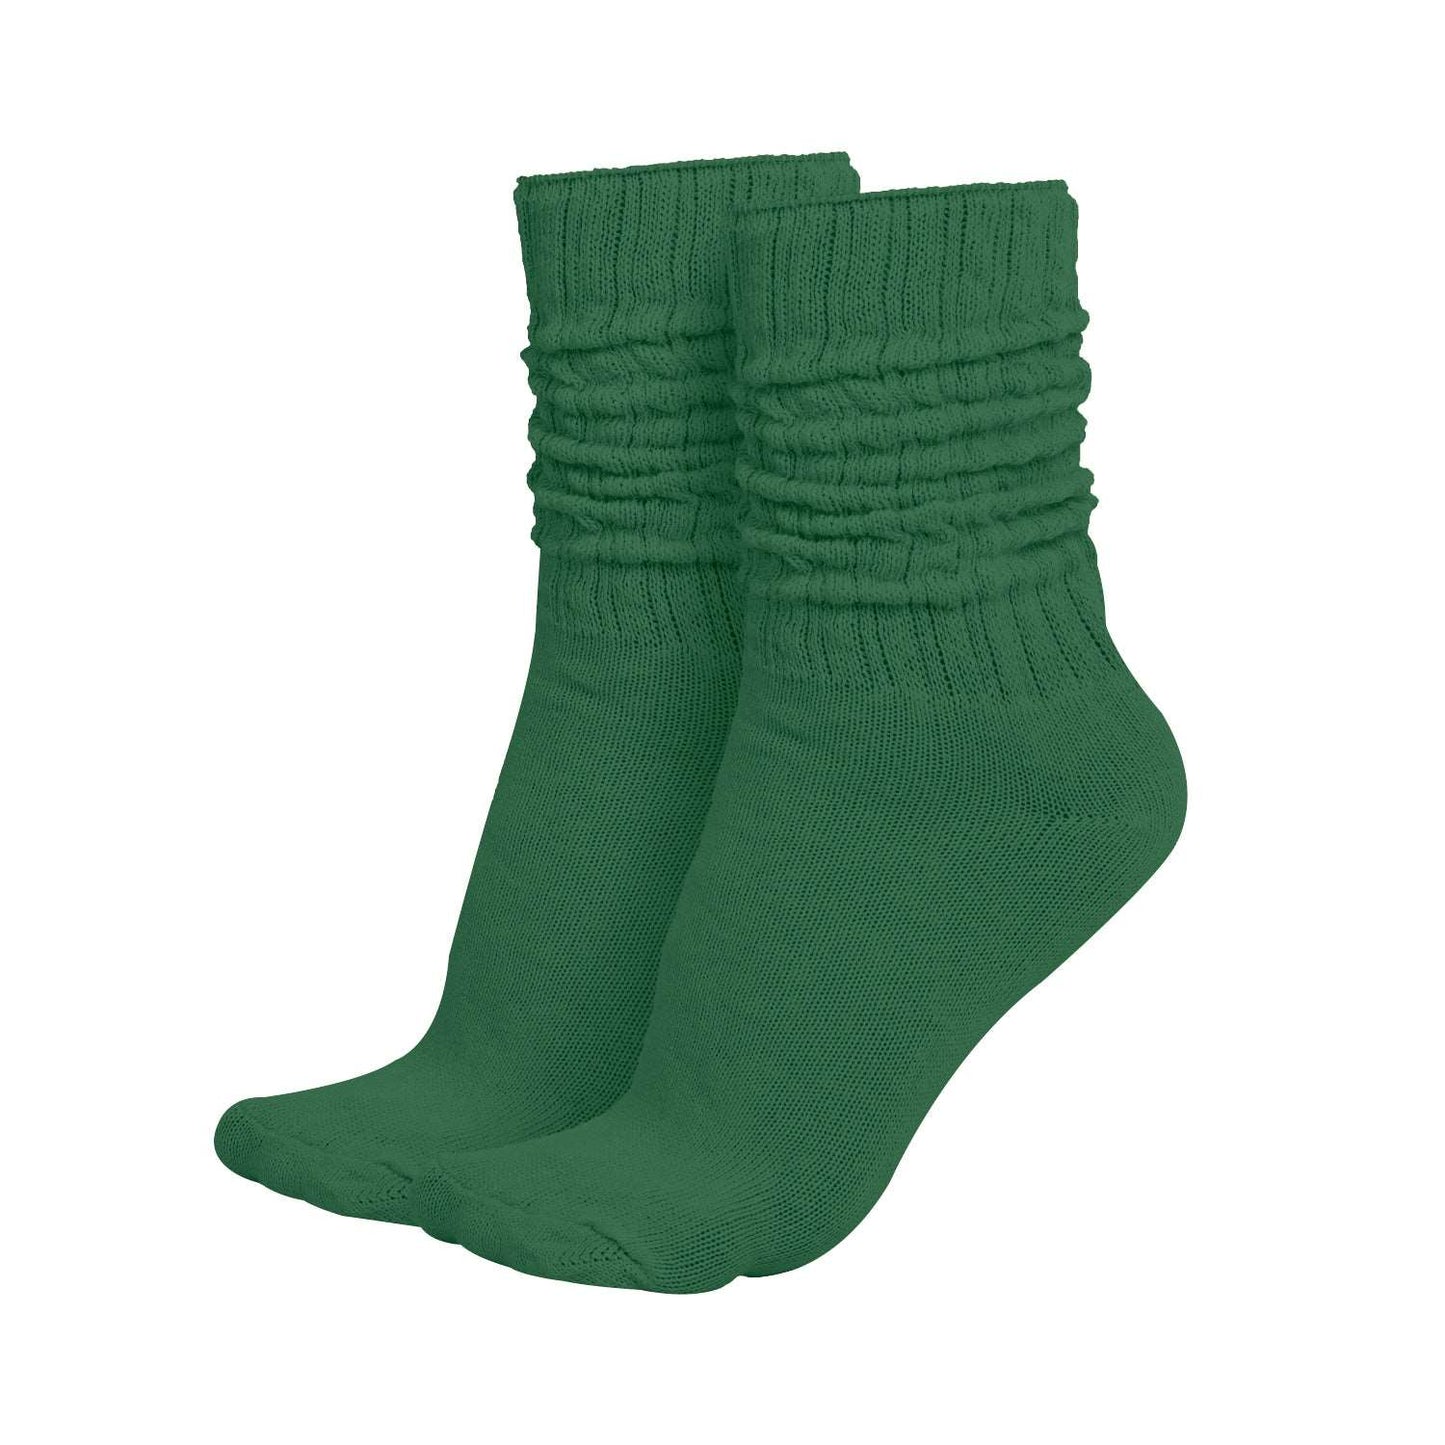 MDR Lightweight Cotton Slouch Socks For Women and Men 1 Pair Made in USA Size 9 to 11 (Hunter Green)